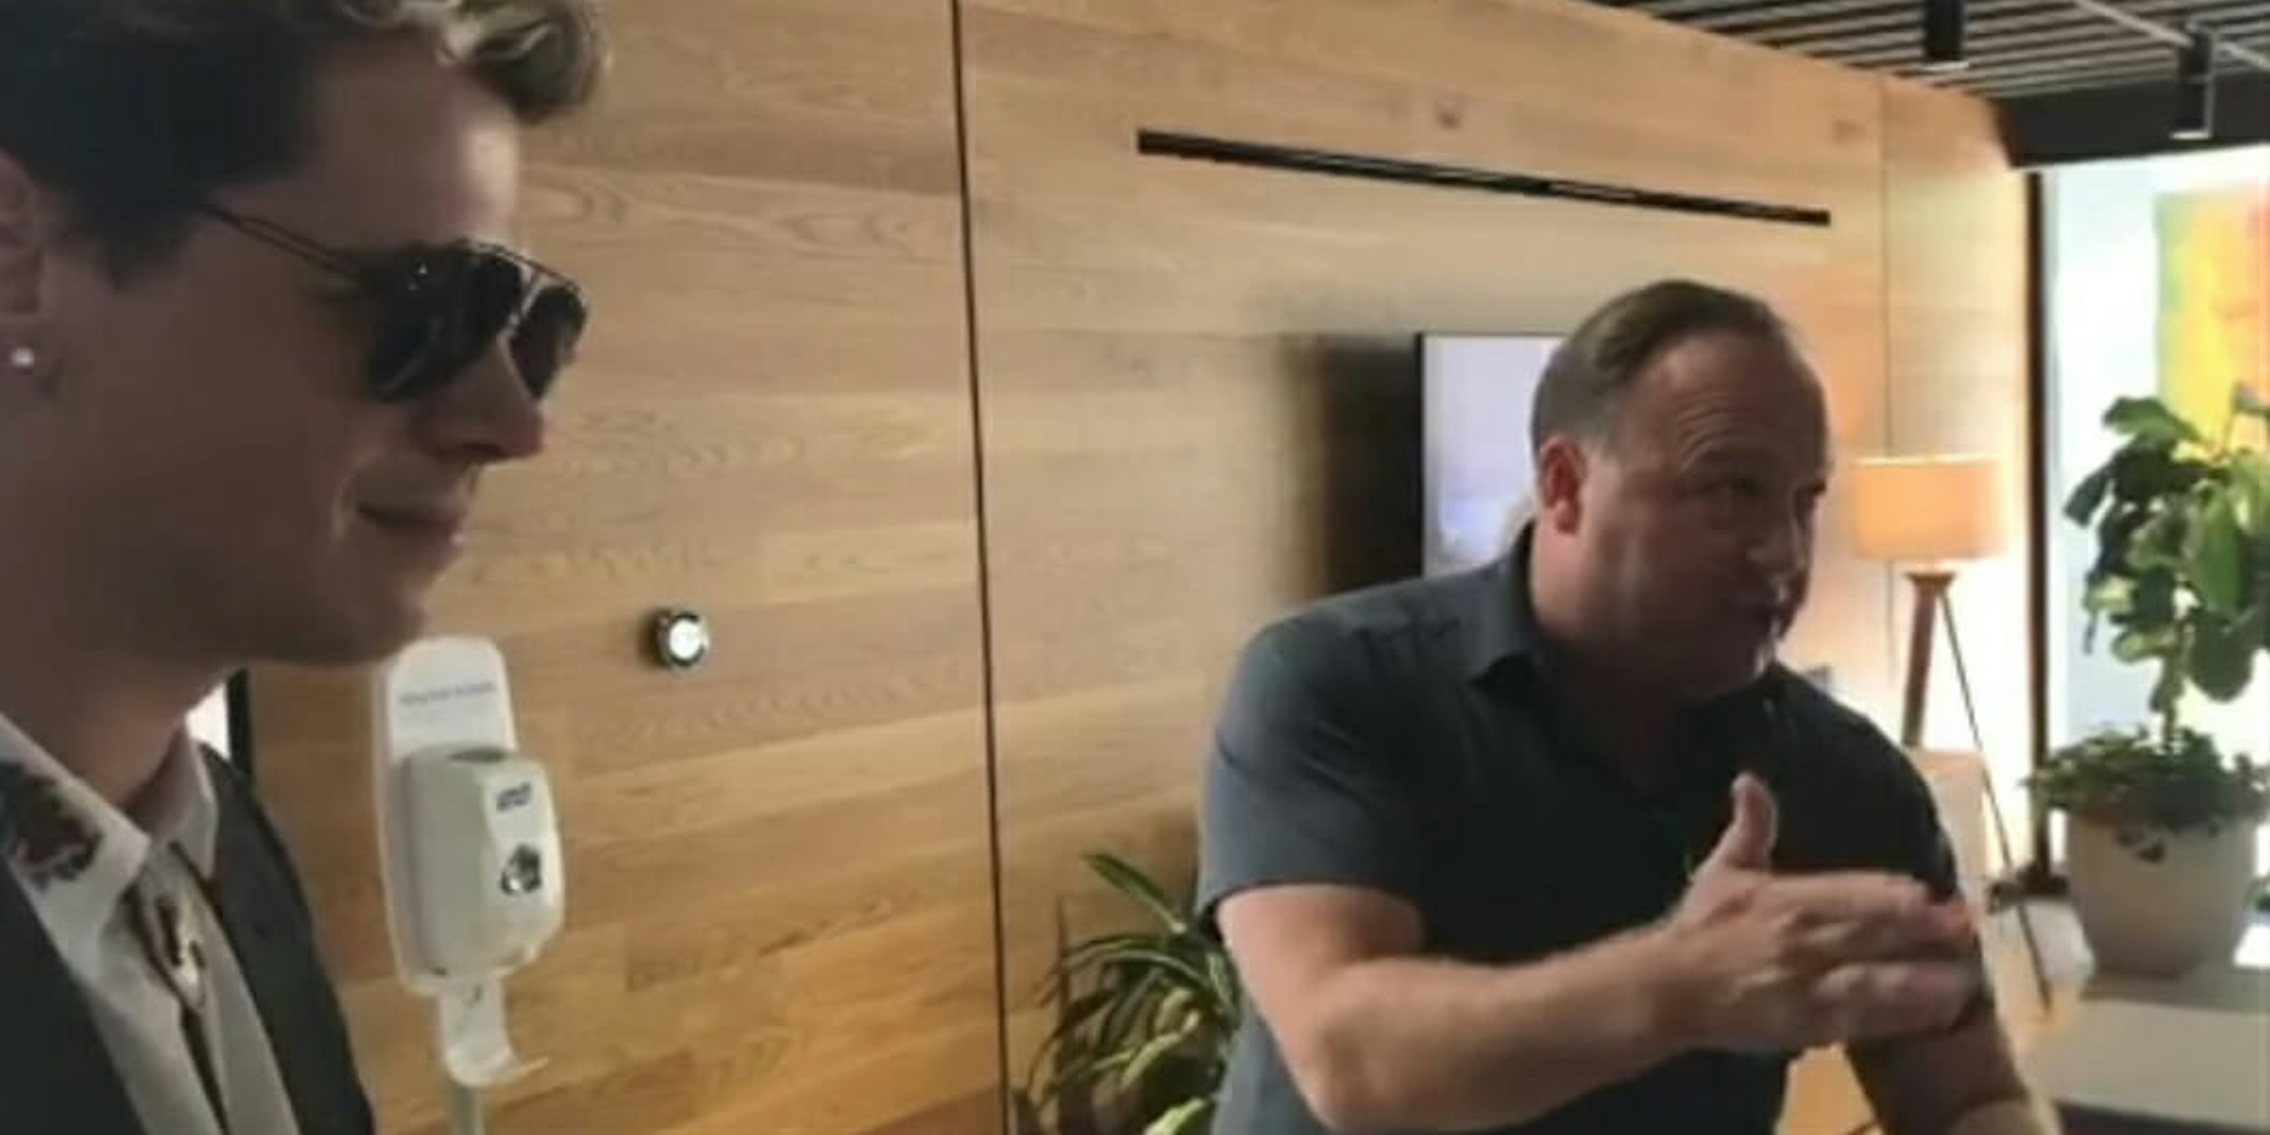 InfoWars host Alex Jones teamed up with far-right provocateur Milo Yiannopoulos to 'storm' a Google Fiber store on Monday and accomplished pretty much nothing.